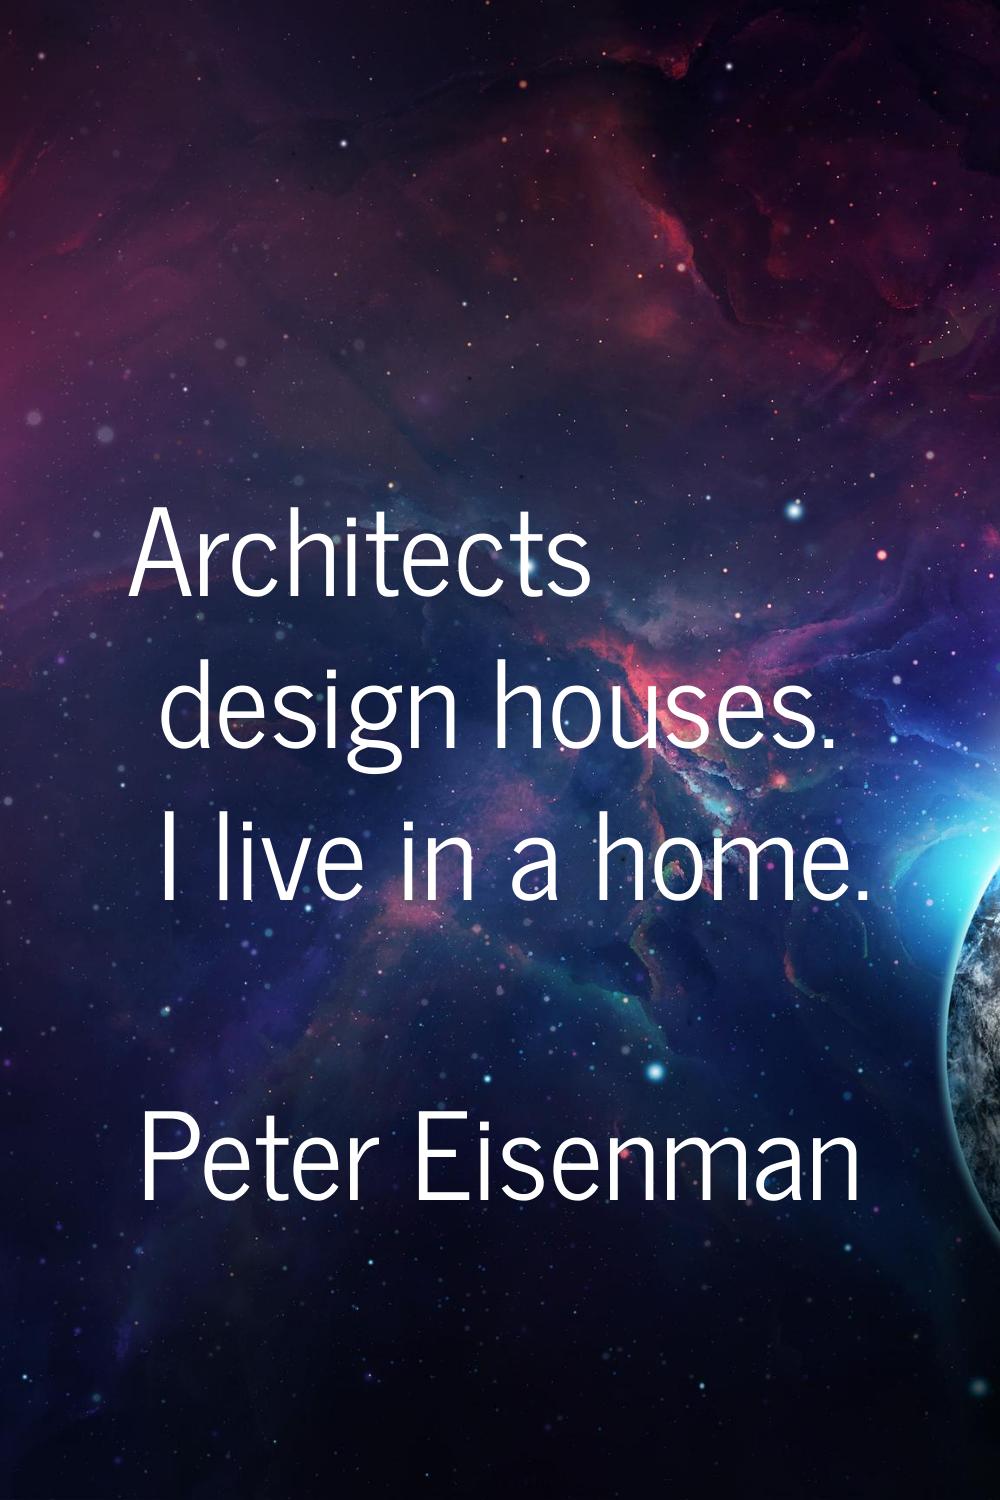 Architects design houses. I live in a home.